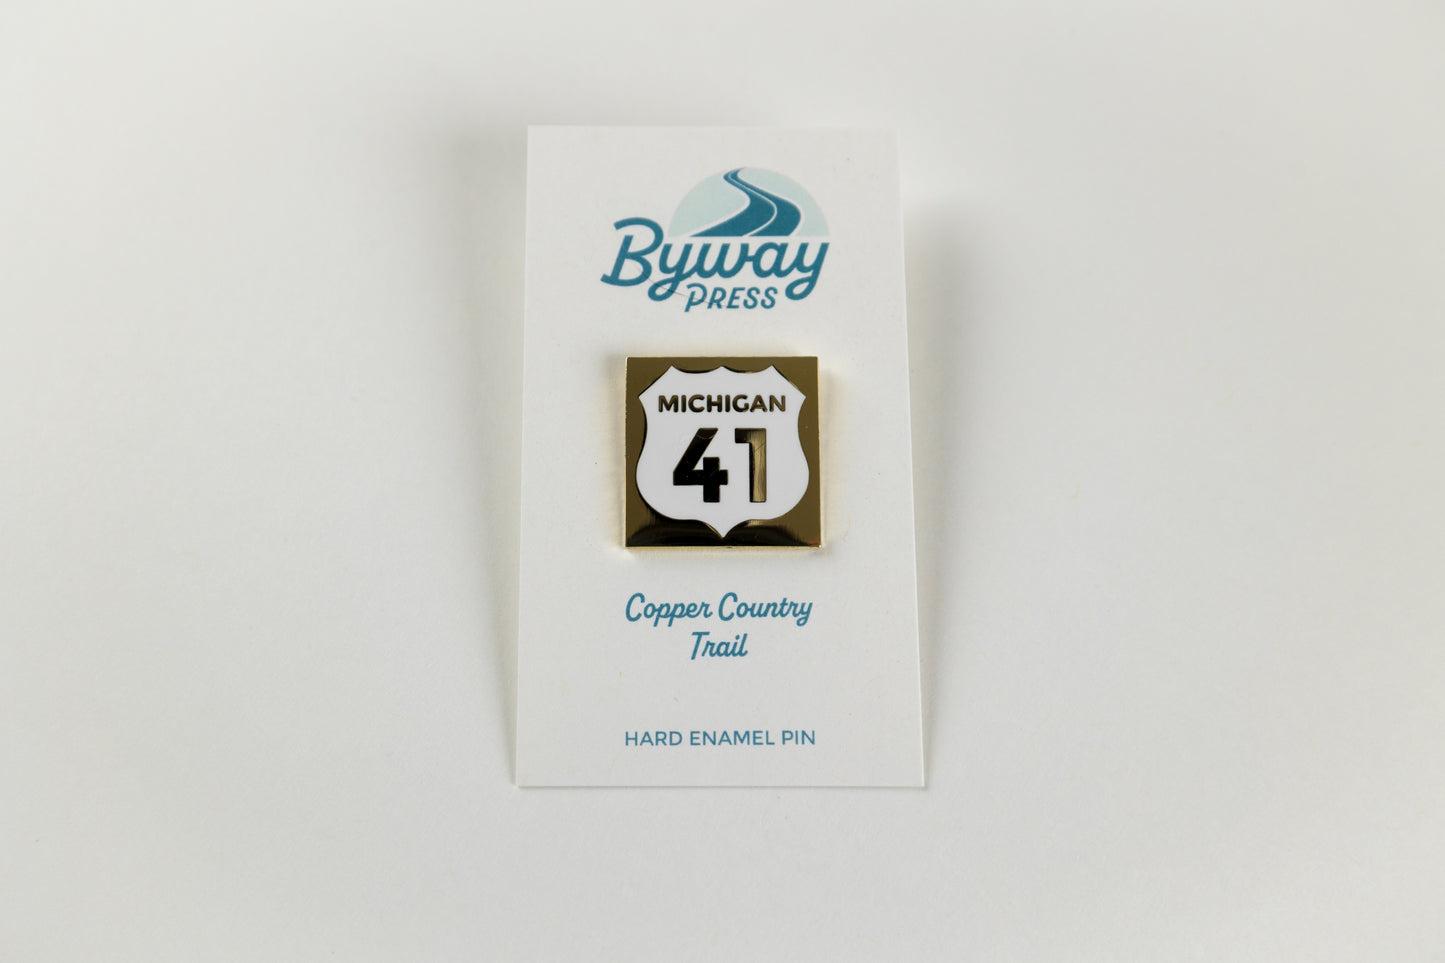 US Highway Michigan 41 Copper Country Trail Enamel Pin